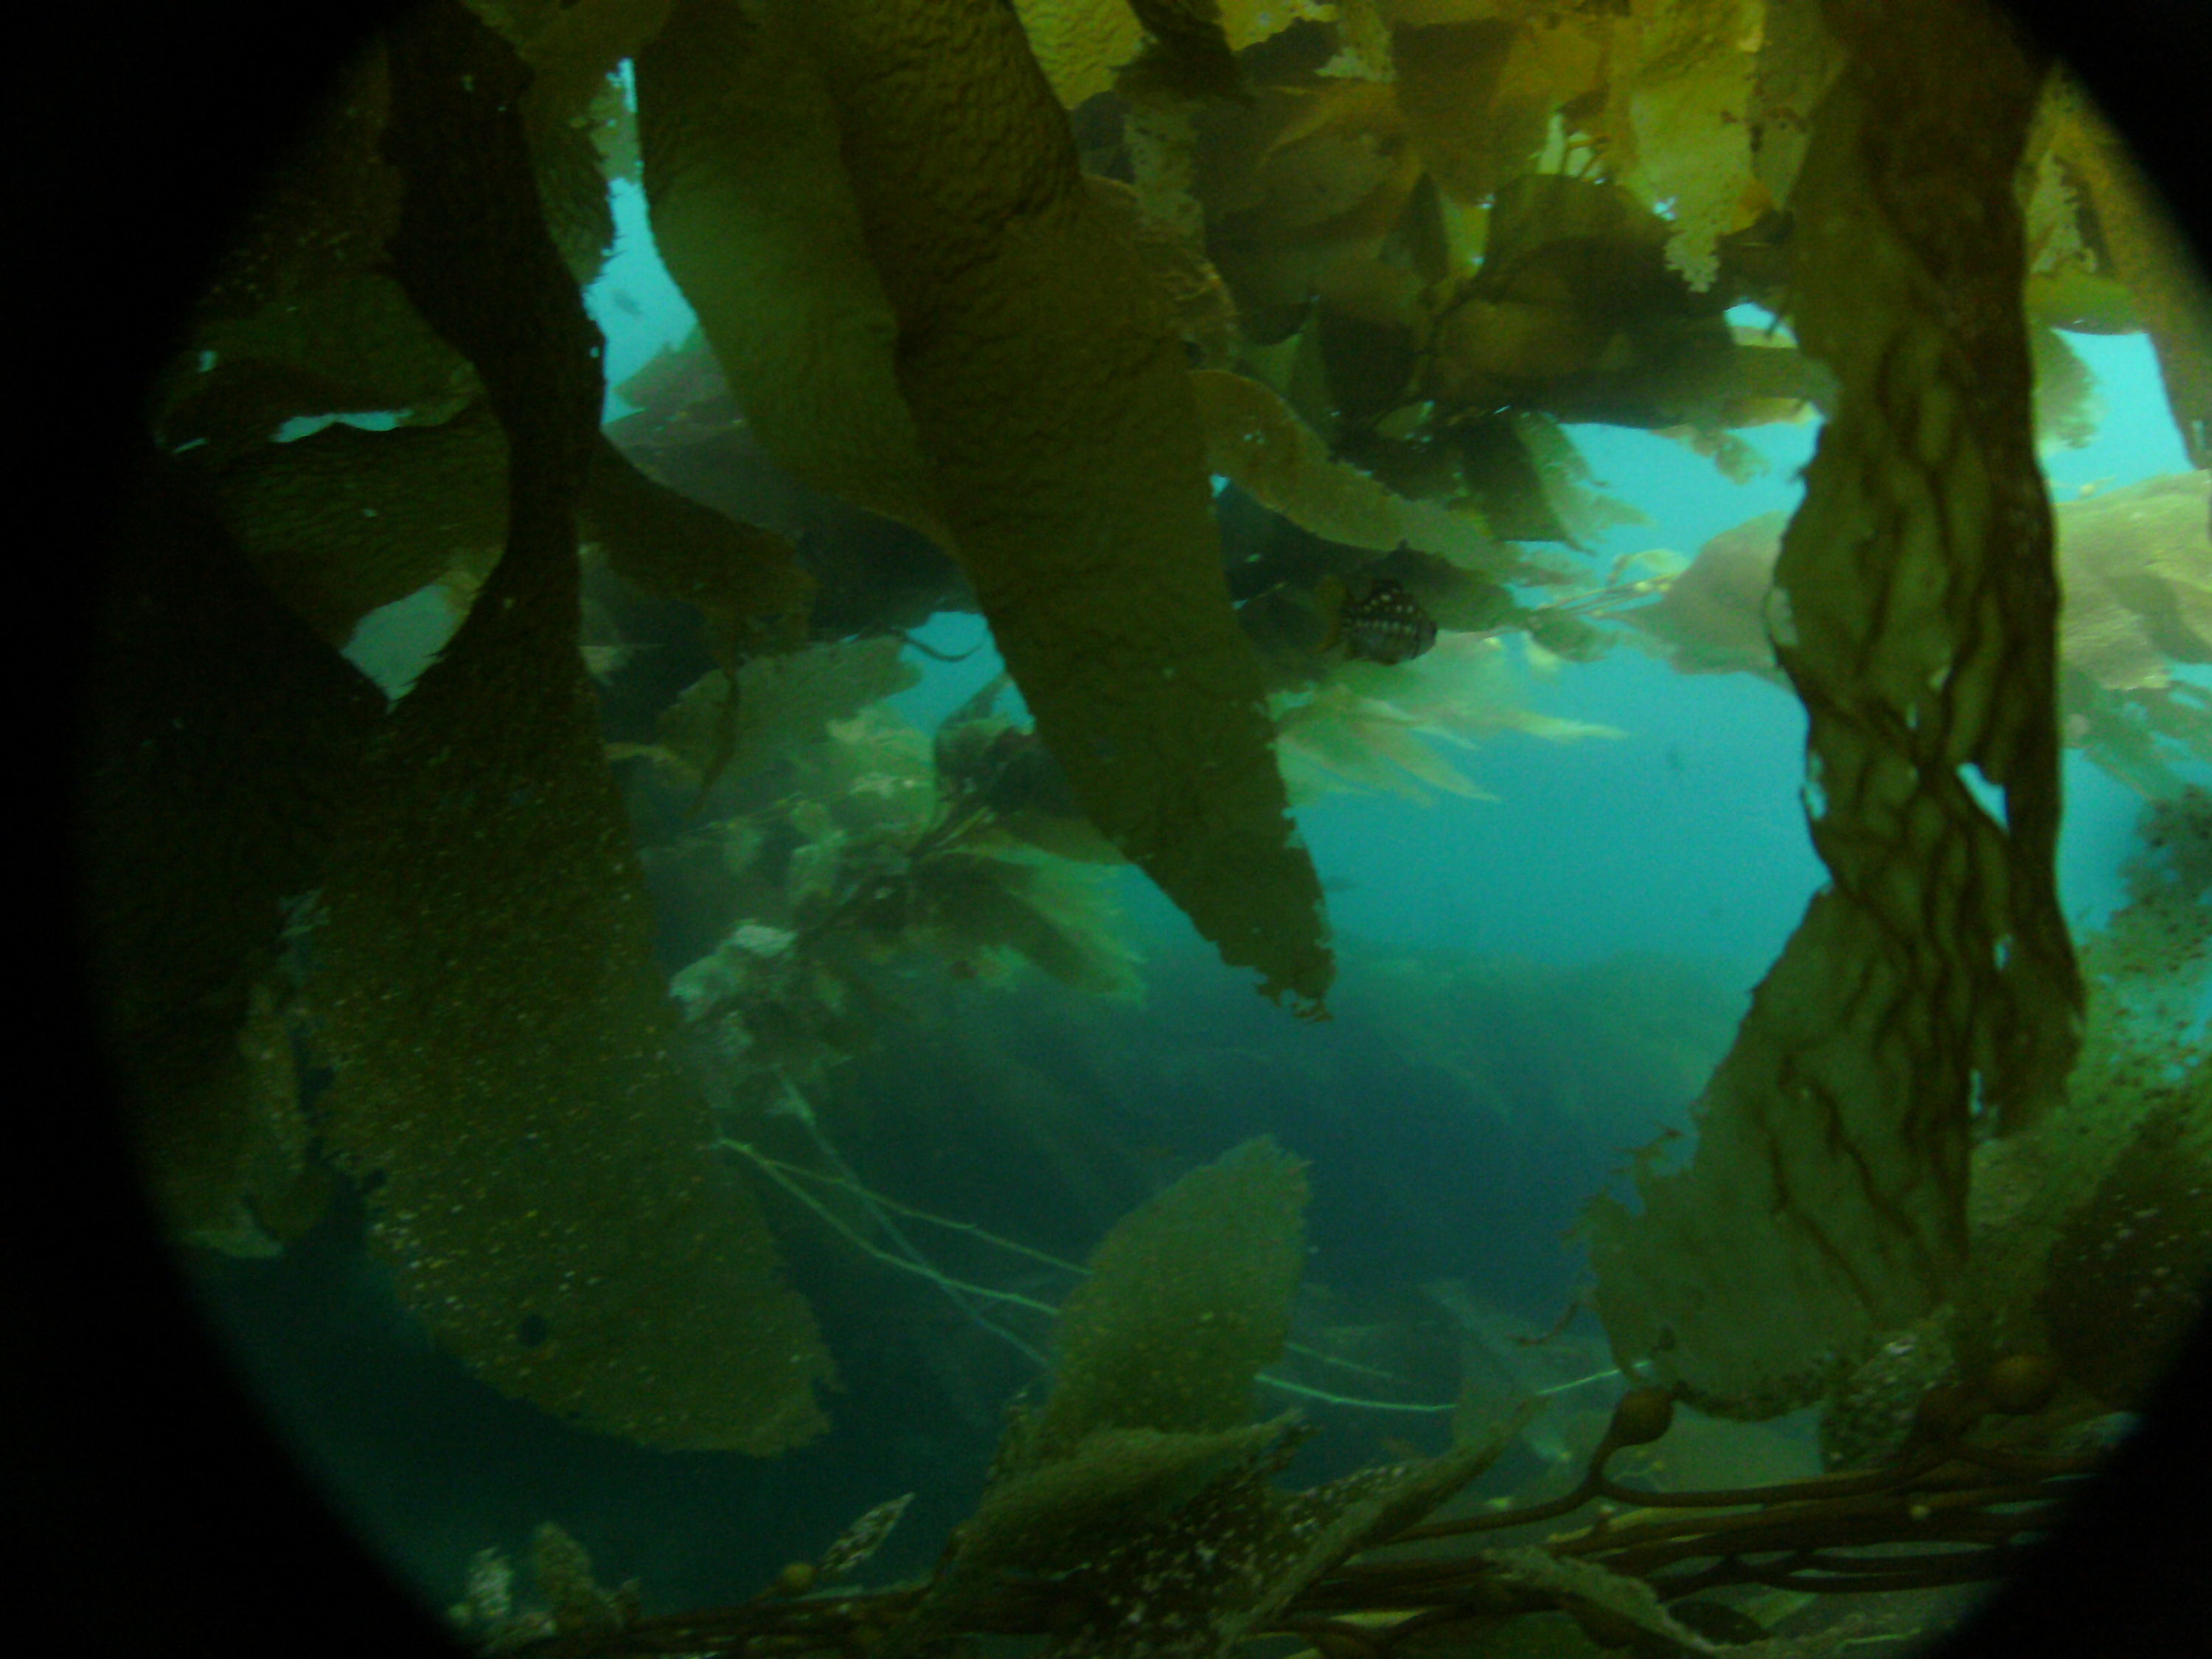 The kelp forest